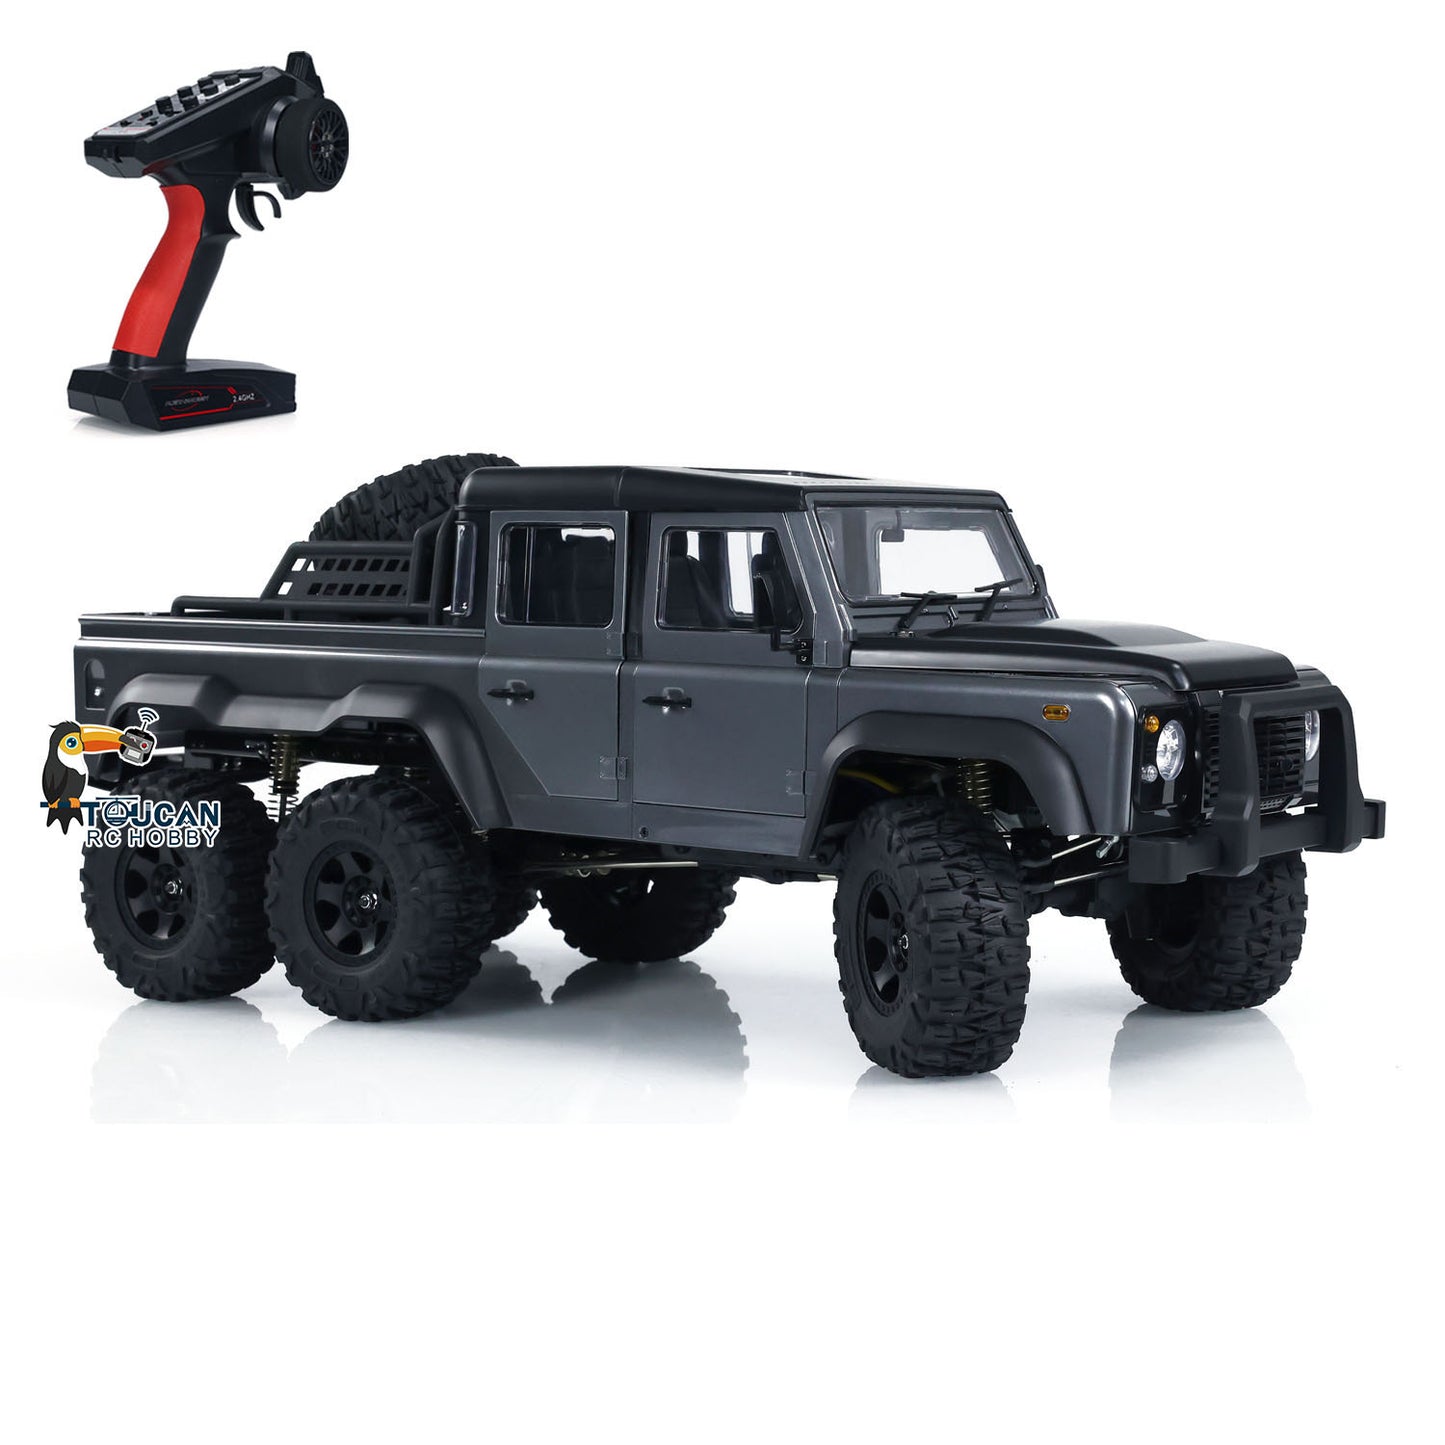 1/10 Scale 6WD RC Pick-up Rock Crawler Off-Road Truck Lights Sounds 2 Speeds PNP Version Painted Assembled Hobby Model